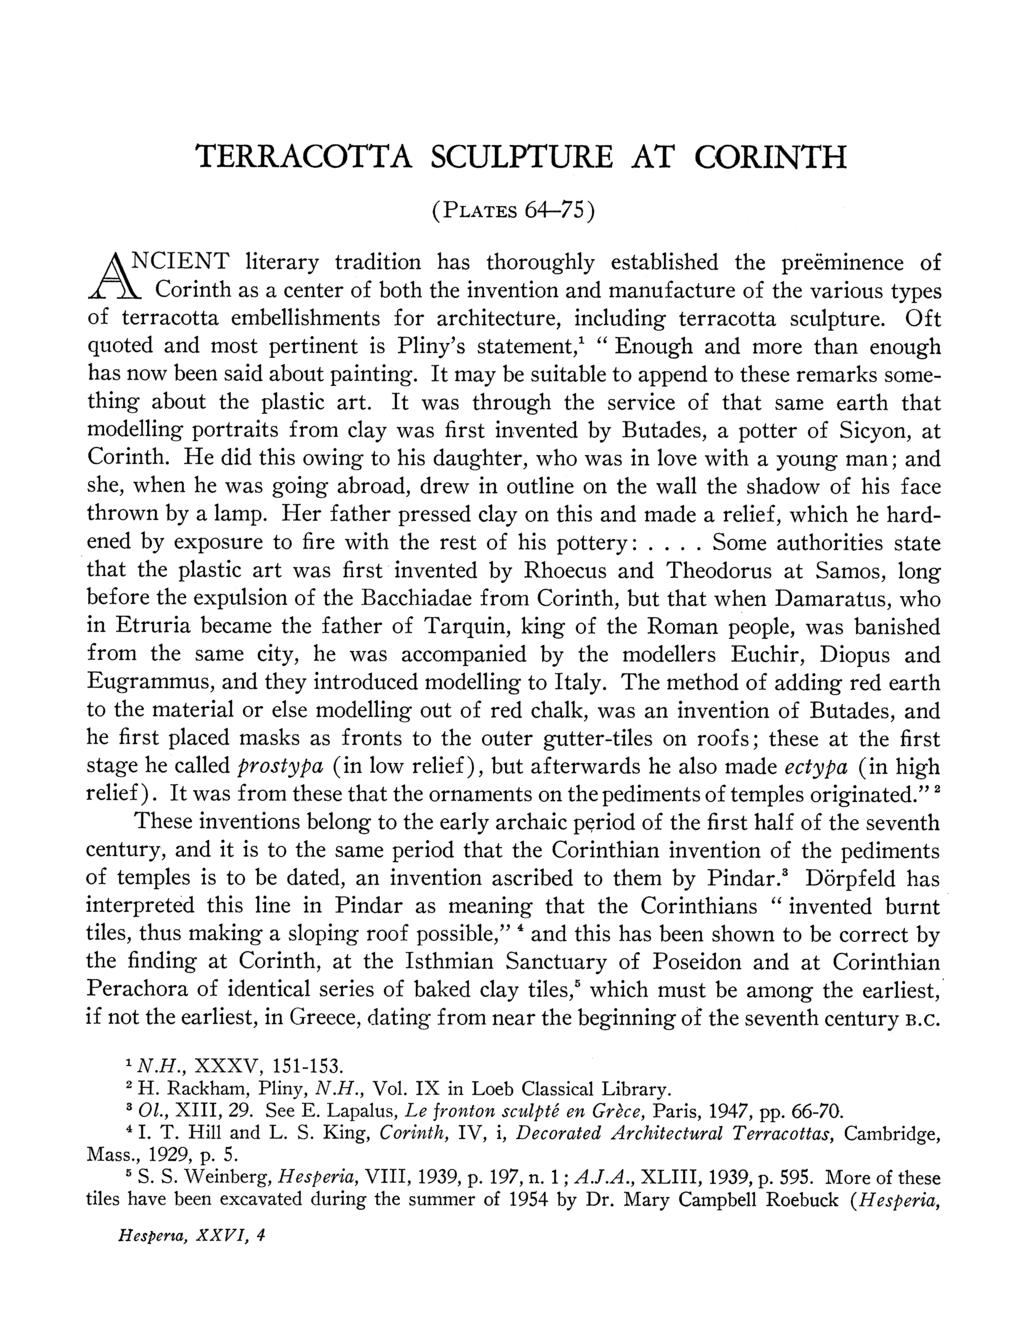 TERRACOTTA SCULPTURE AT CORINTH (PLATES 64-75) A NCIENT literary tradition has thoroughly established the preeminence of Corinth as a center of both the invention and manufacture of the various types